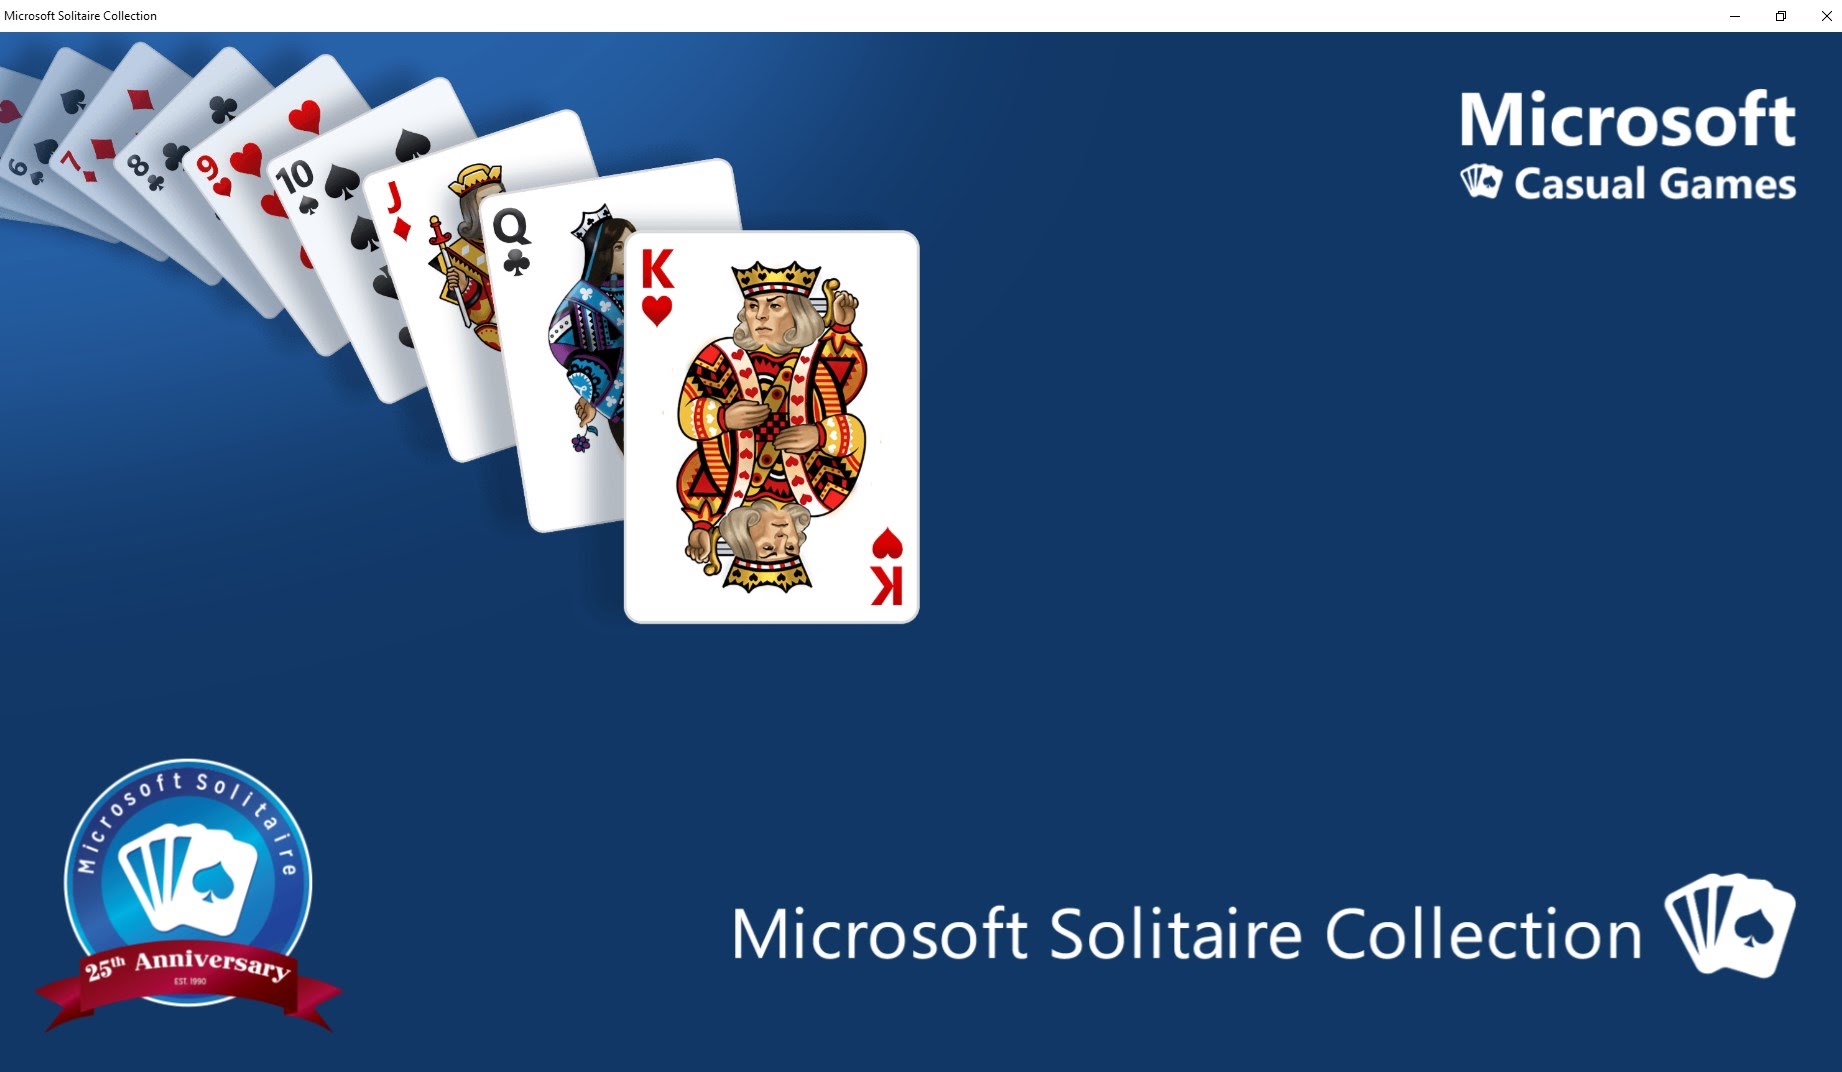 microsoft solitaire collection sudoku